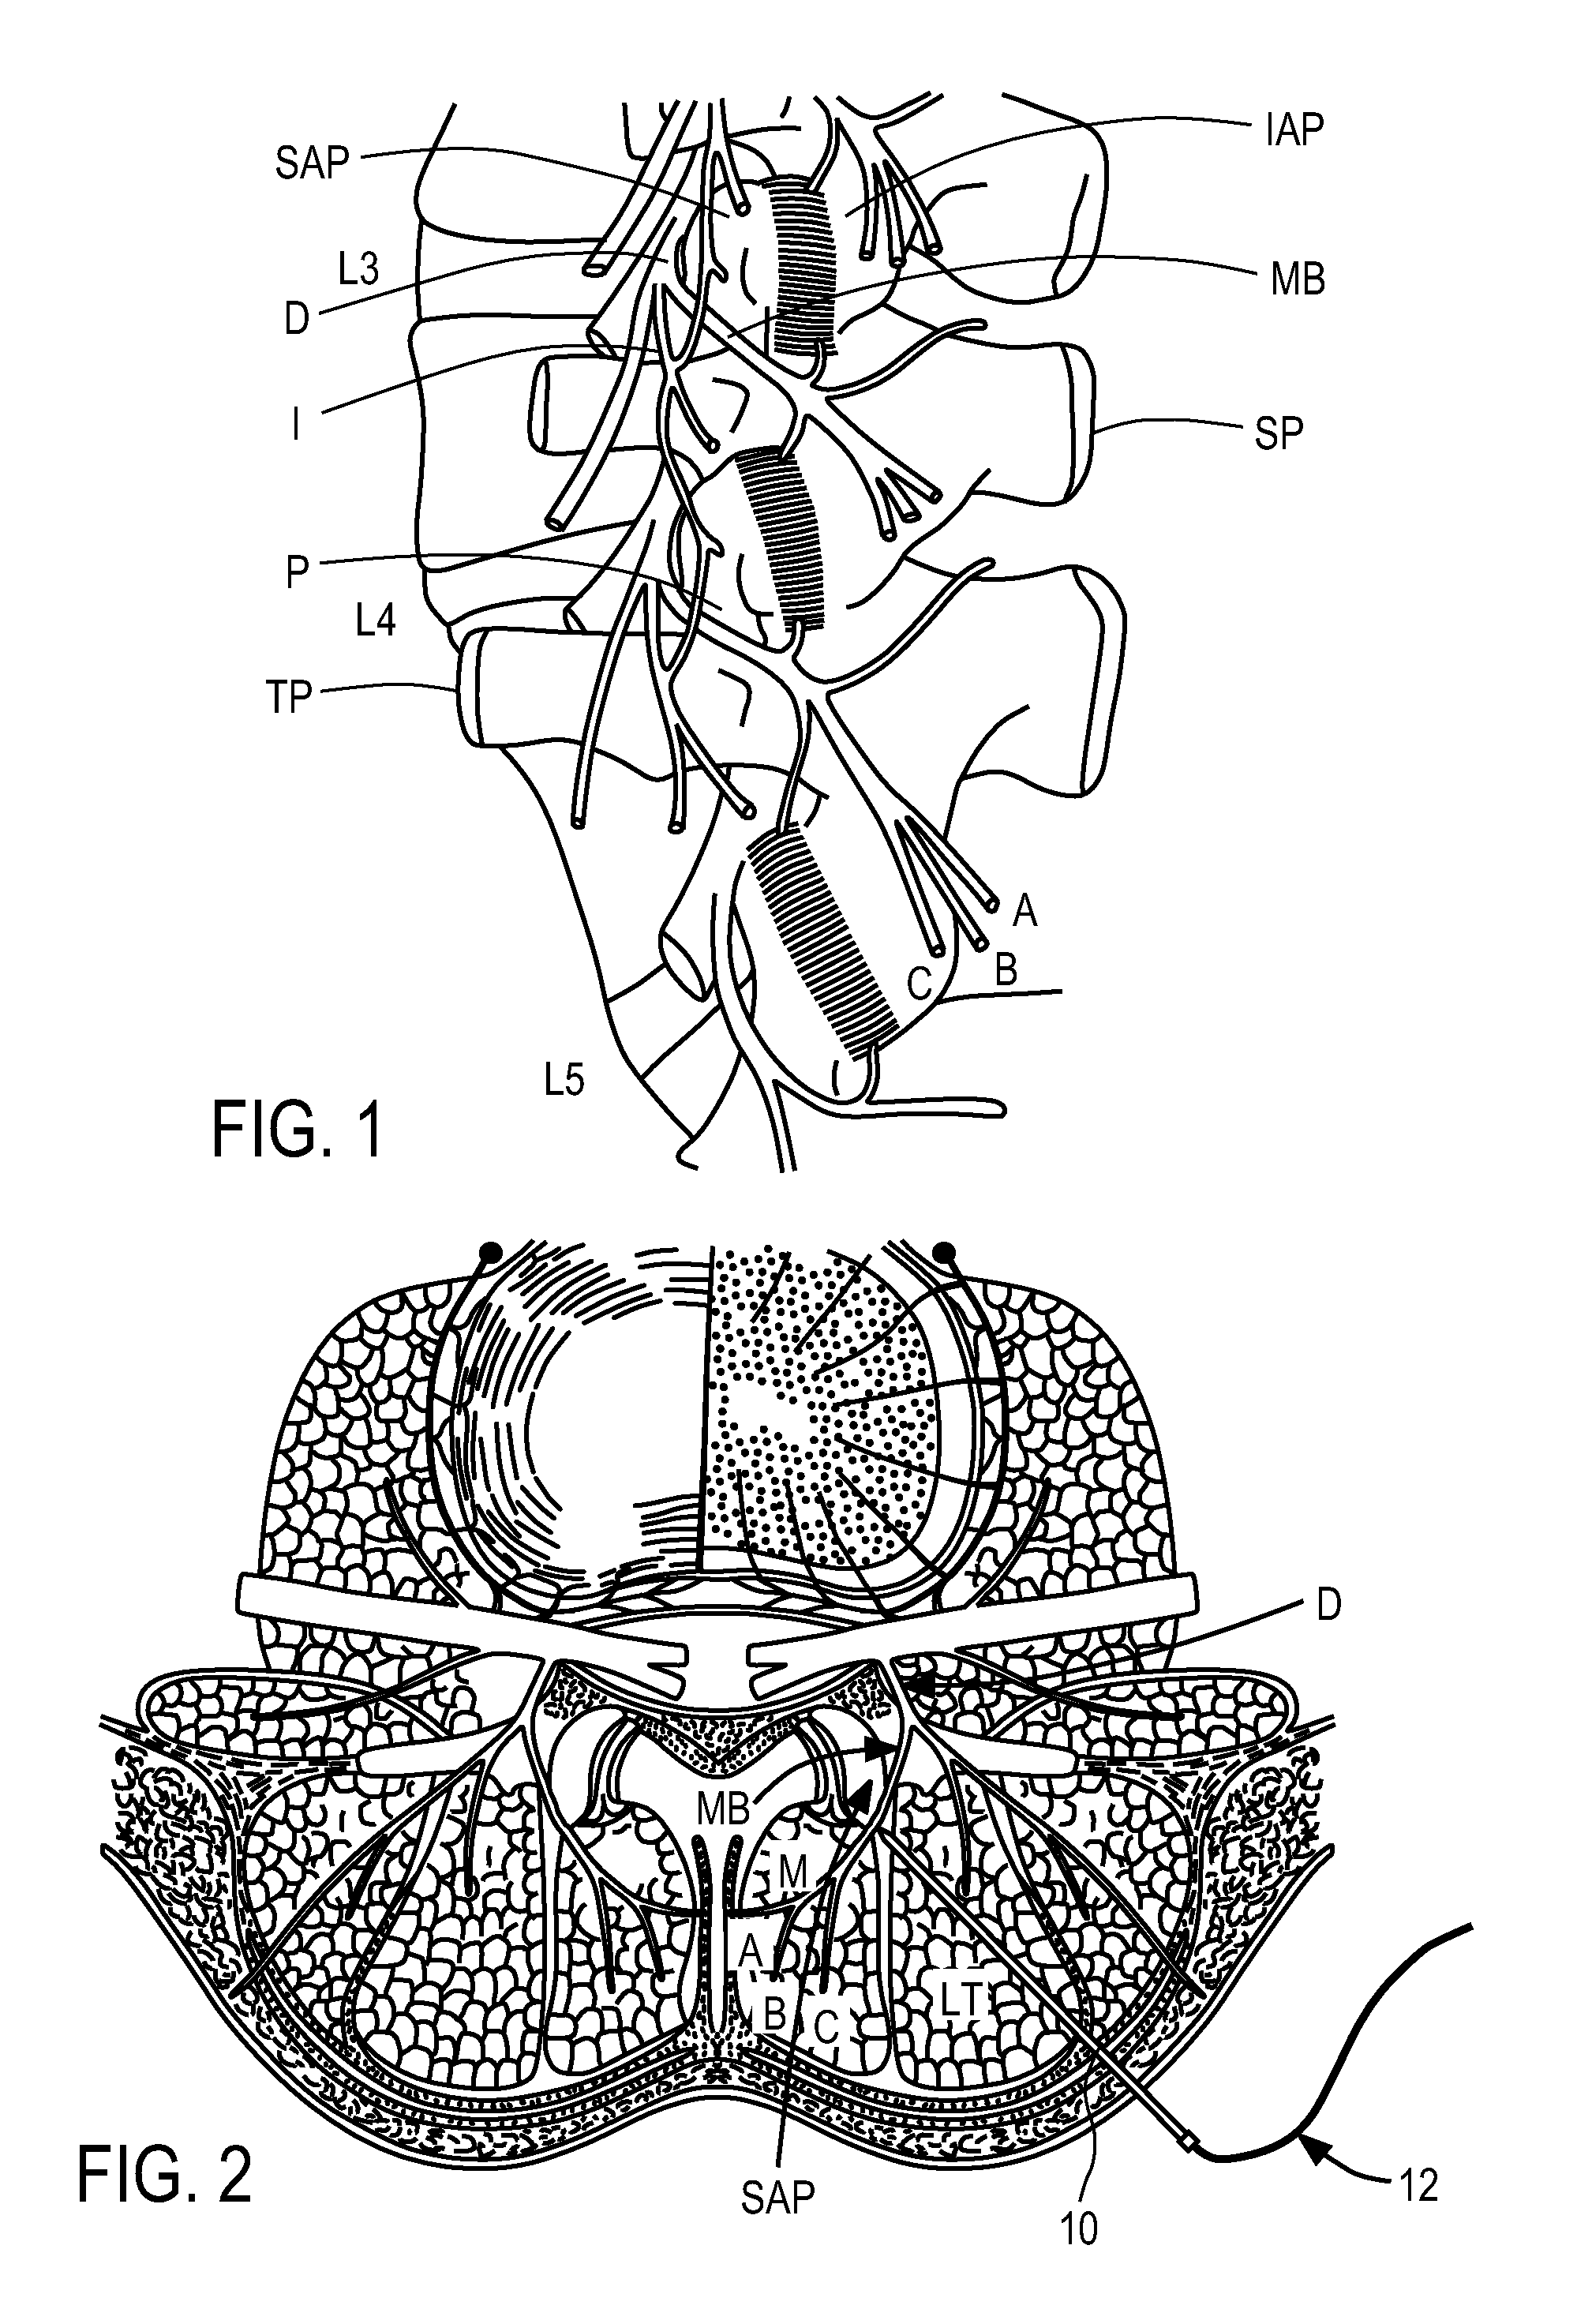 Methods of implanting electrode leads for use with implantable neuromuscular electrical stimulator